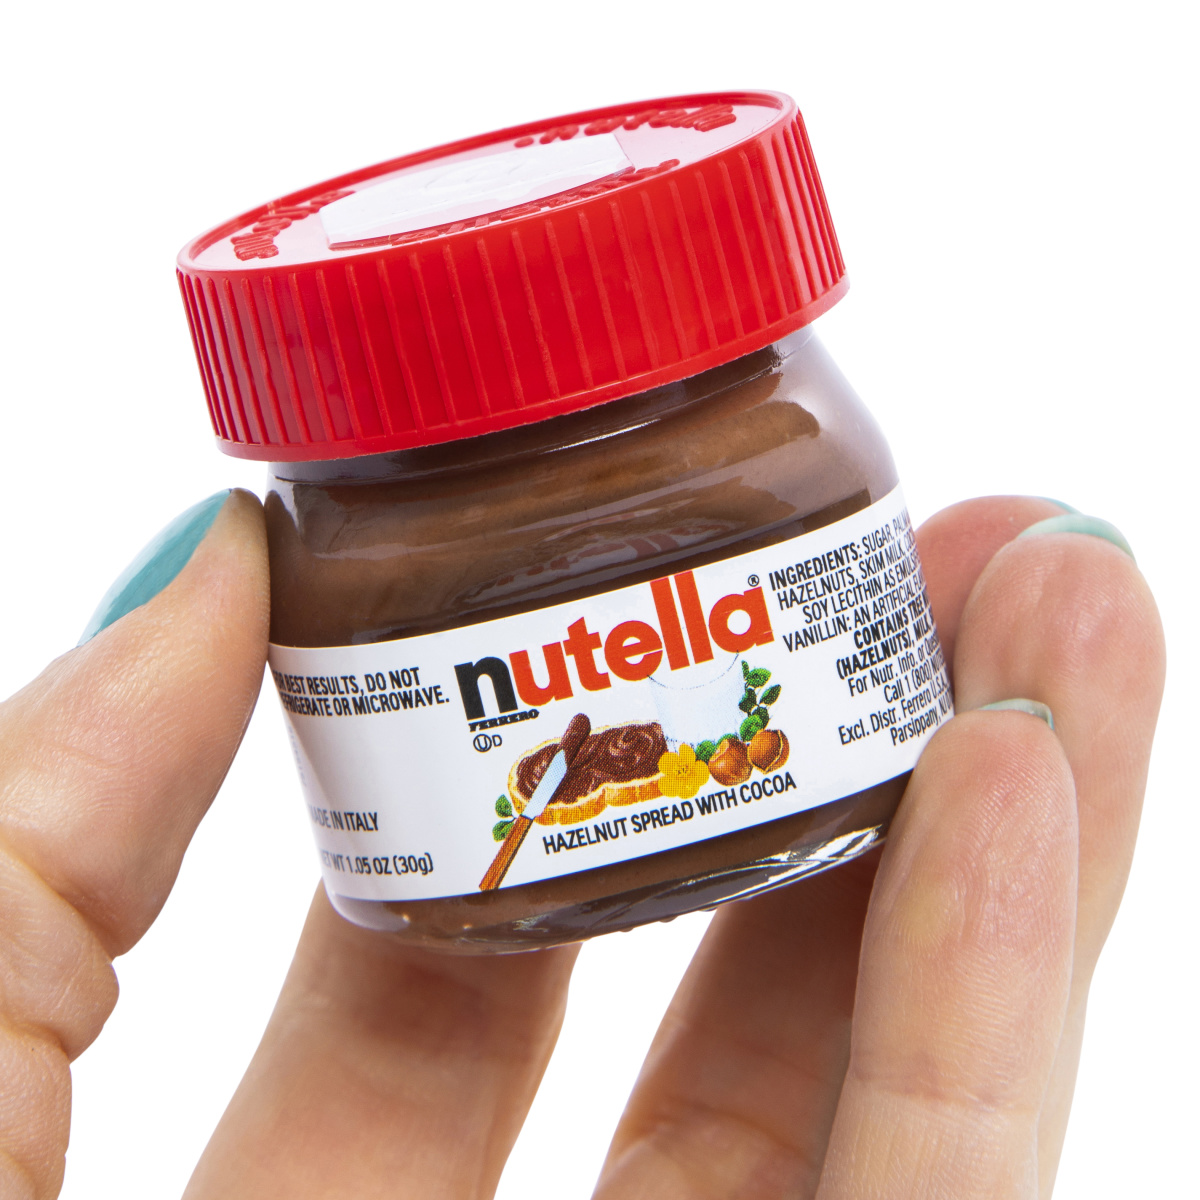 Smallest (30g) and biggest (3kg) jar of Nutella currently available :  r/mildlyinteresting